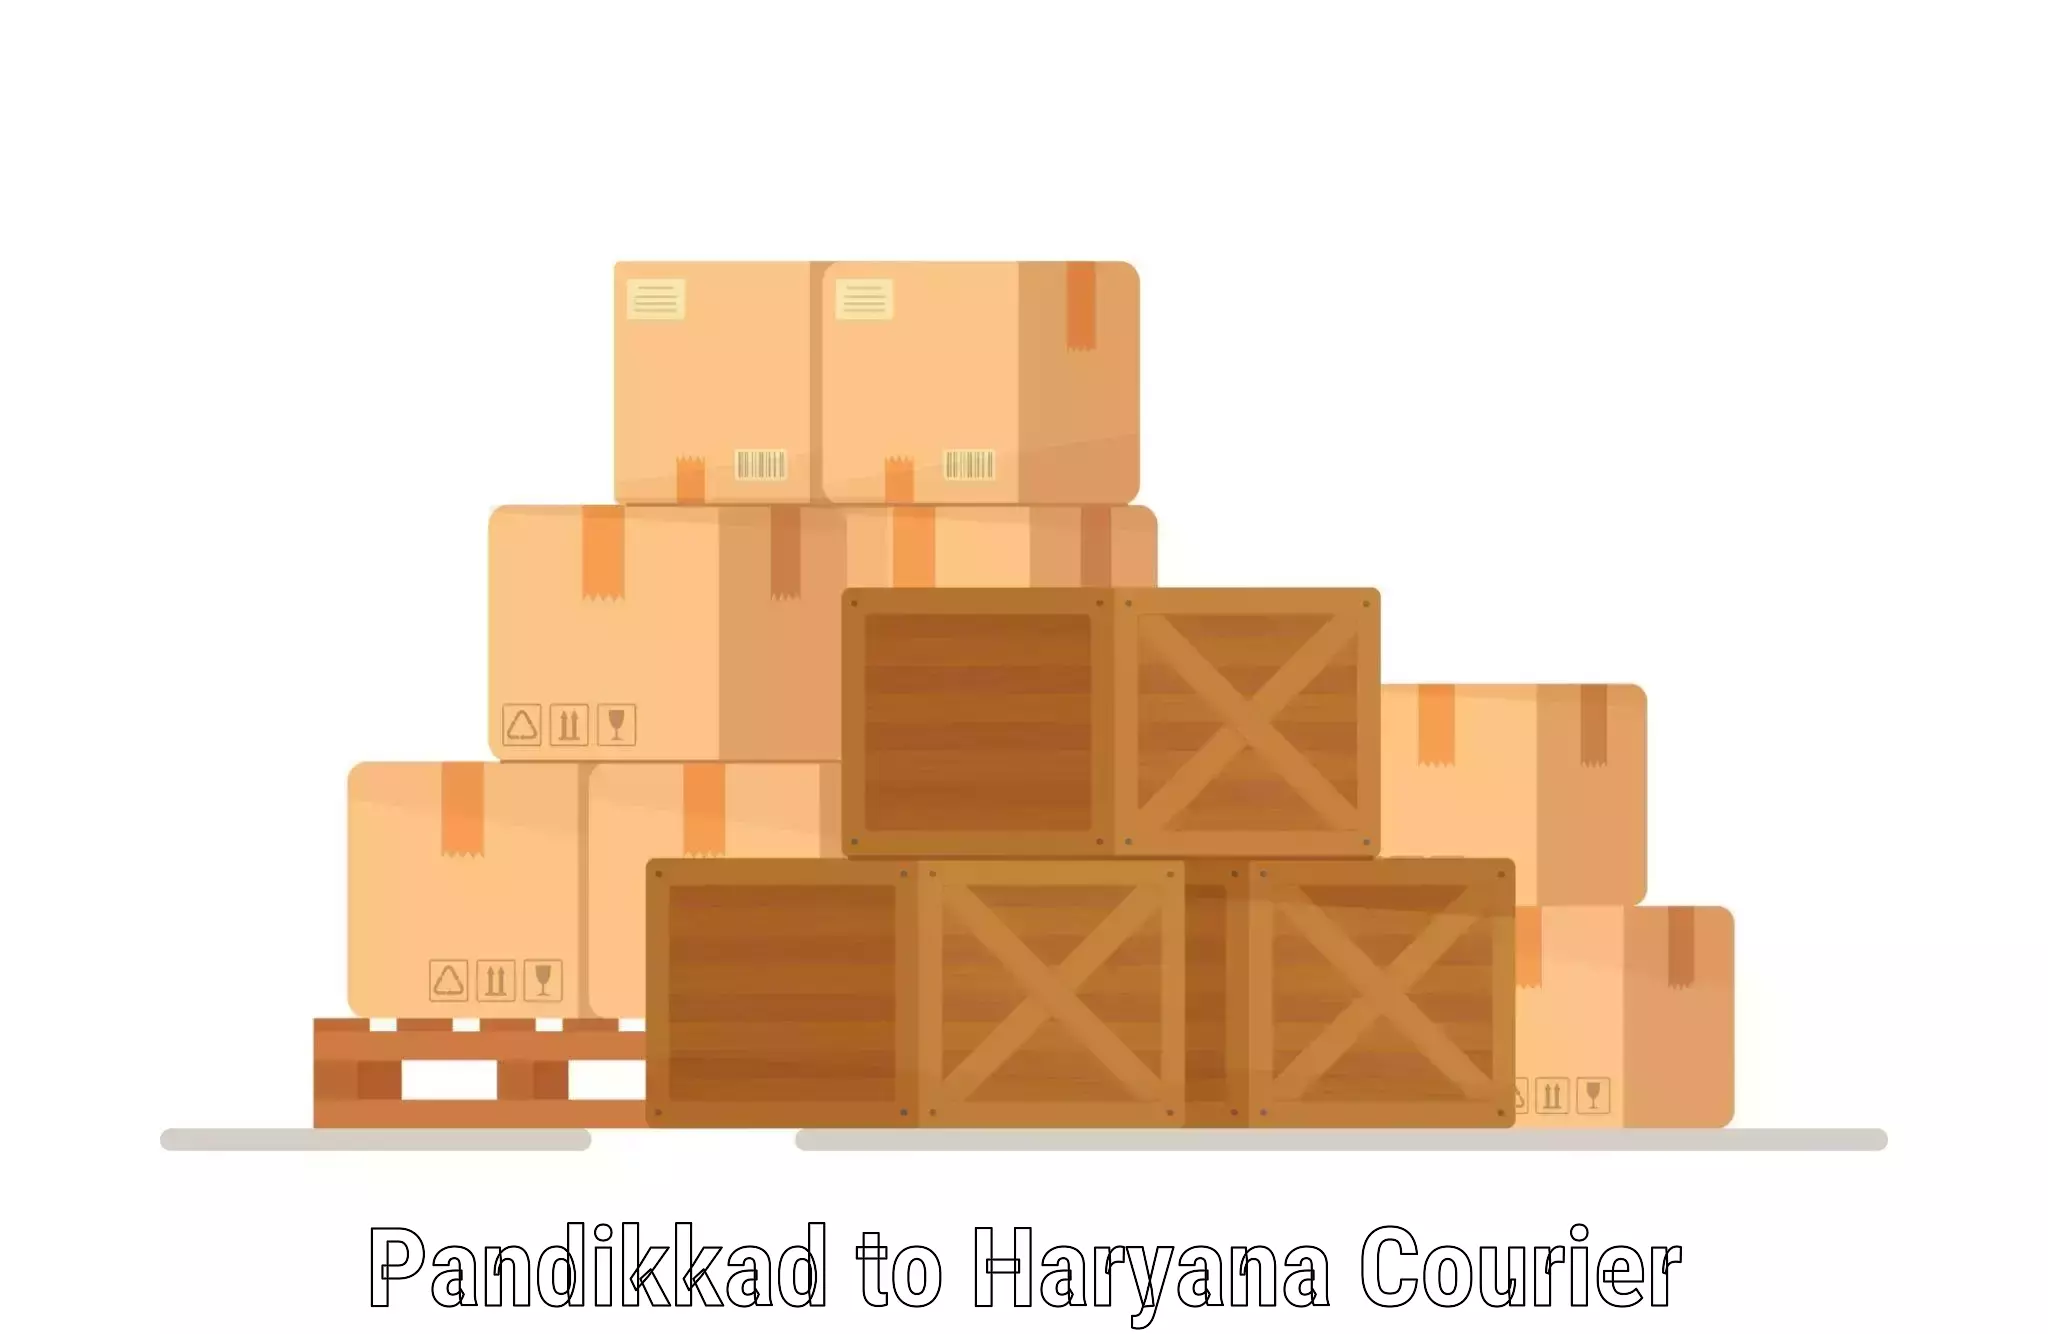 Parcel delivery automation Pandikkad to Hansi